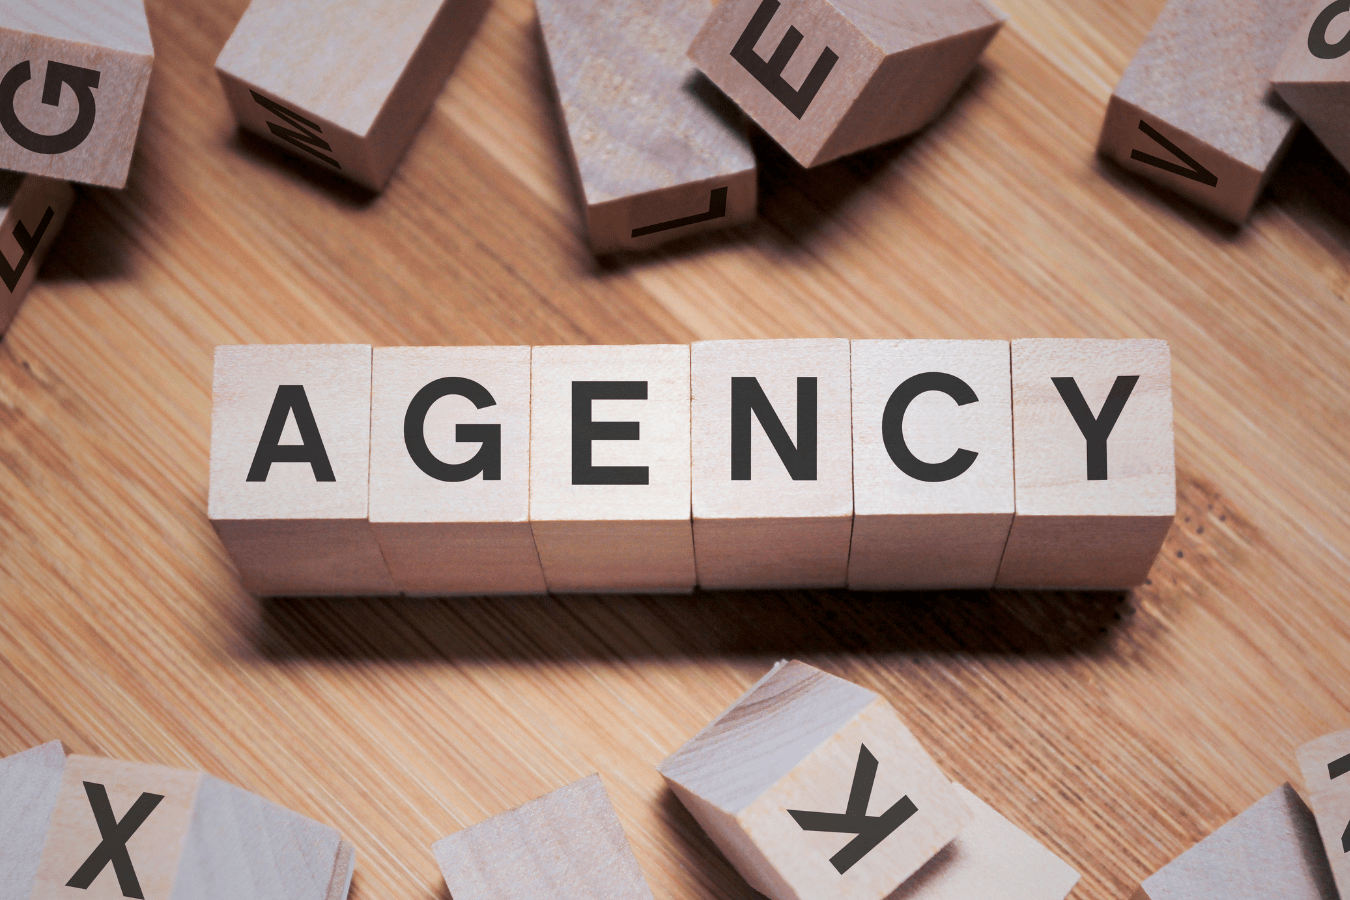 Agency written on blocks: digital marketing agency vs in-house pros and cons.